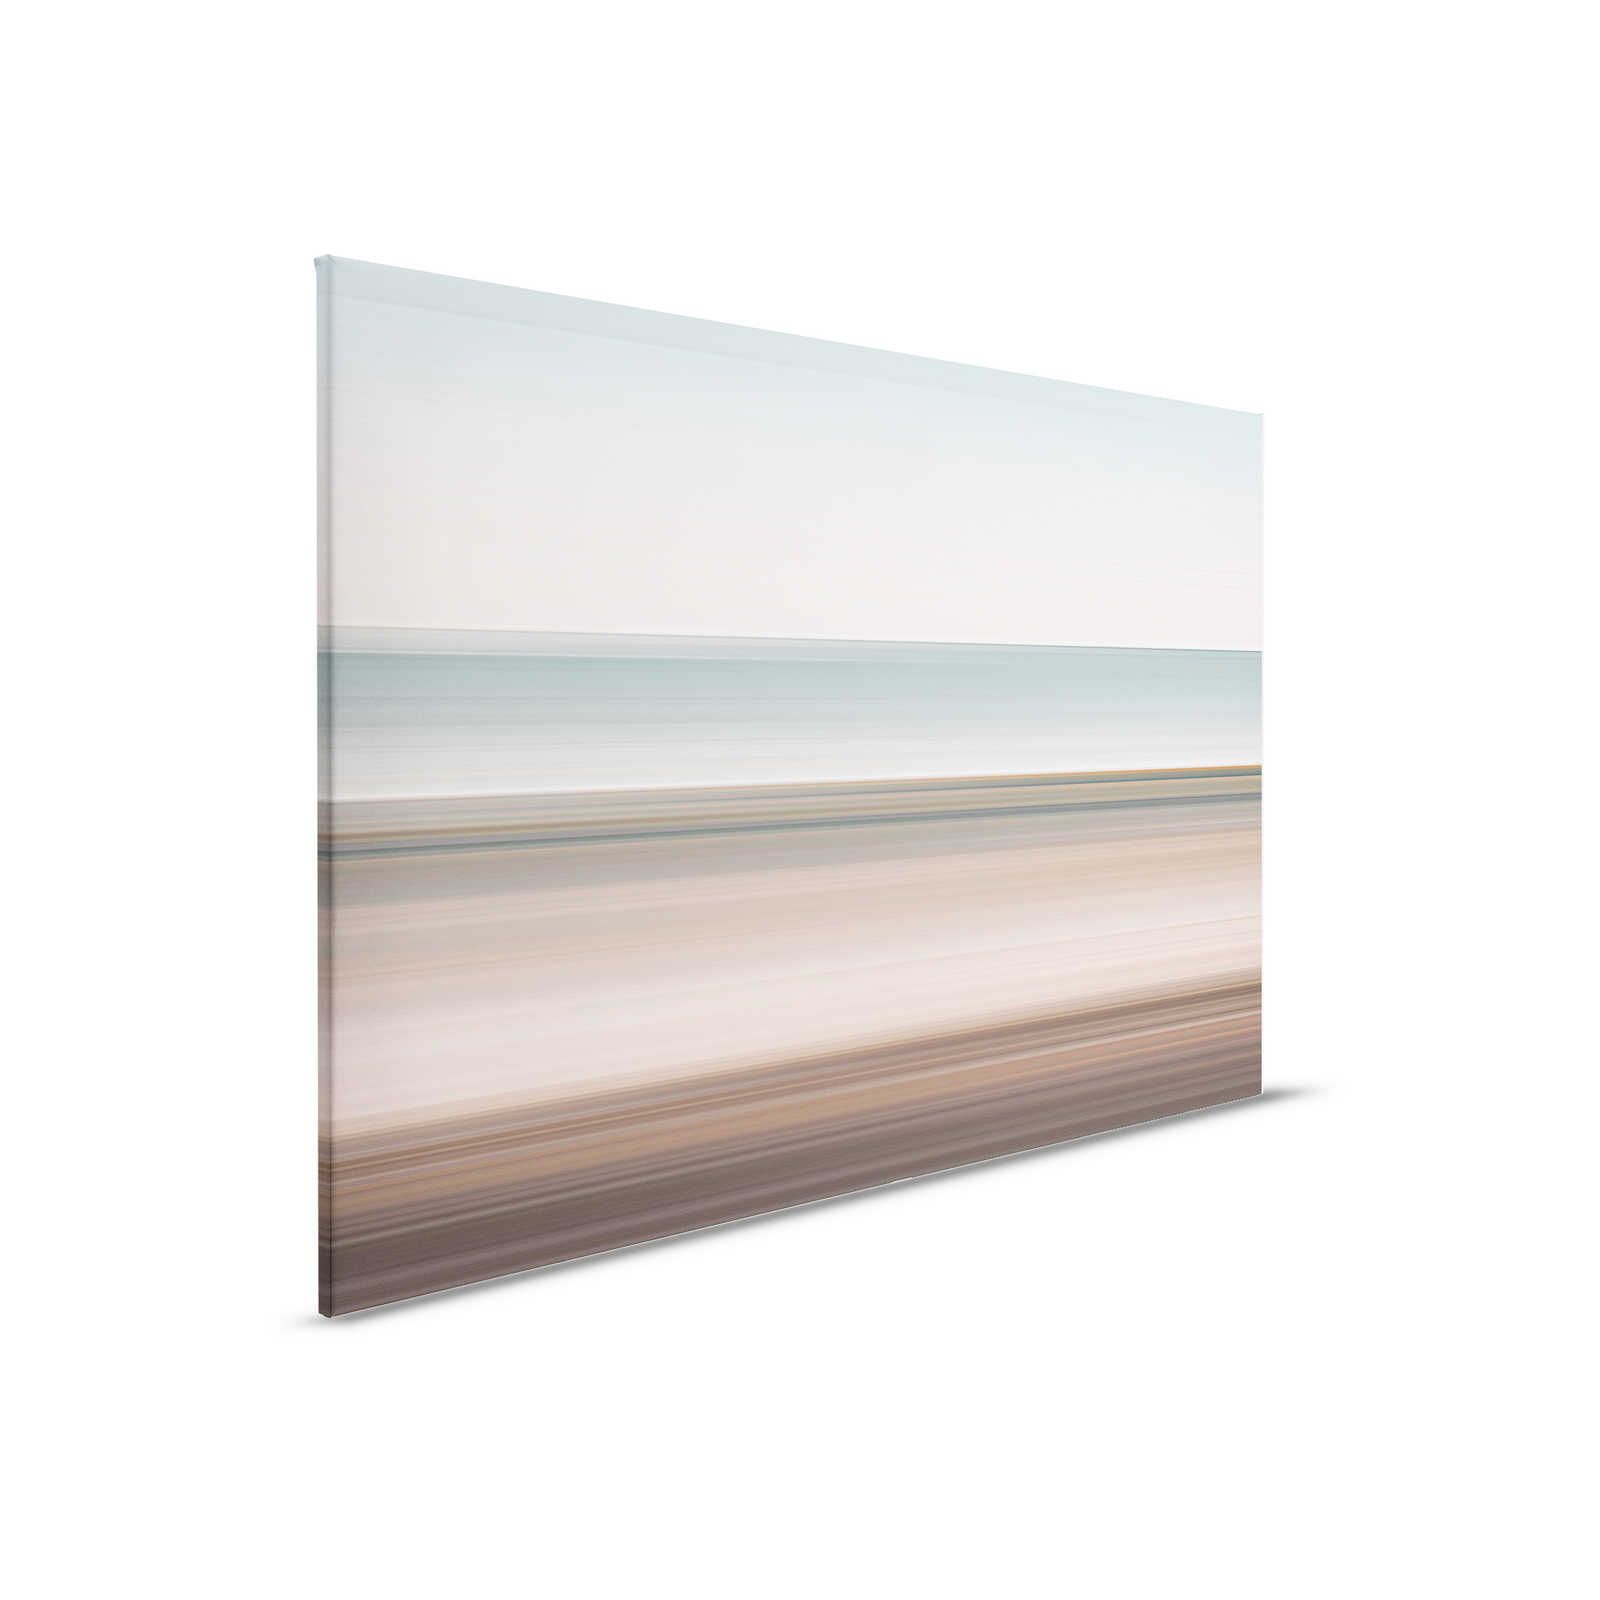         Horizon 2 - Canvas painting abstract landscape with line design - 0,90 m x 0,60 m
    